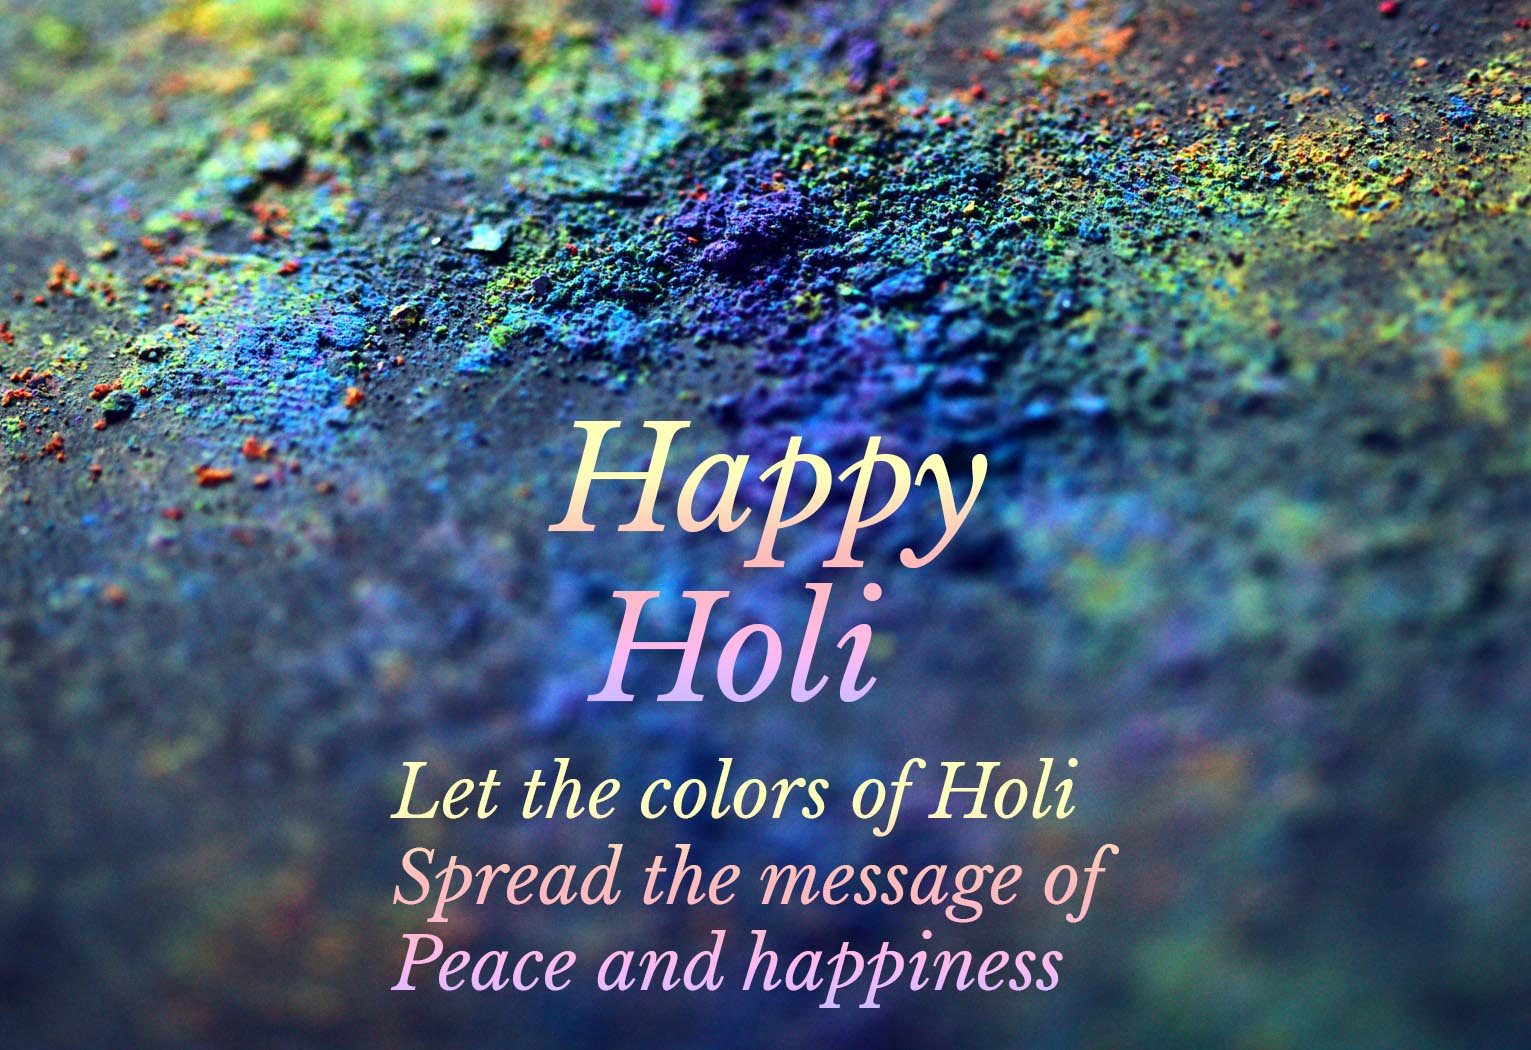 Happy Holi 2022 Image, Quotes, Wishes, Greetings, Messages, Shayari and Whatsapp Status